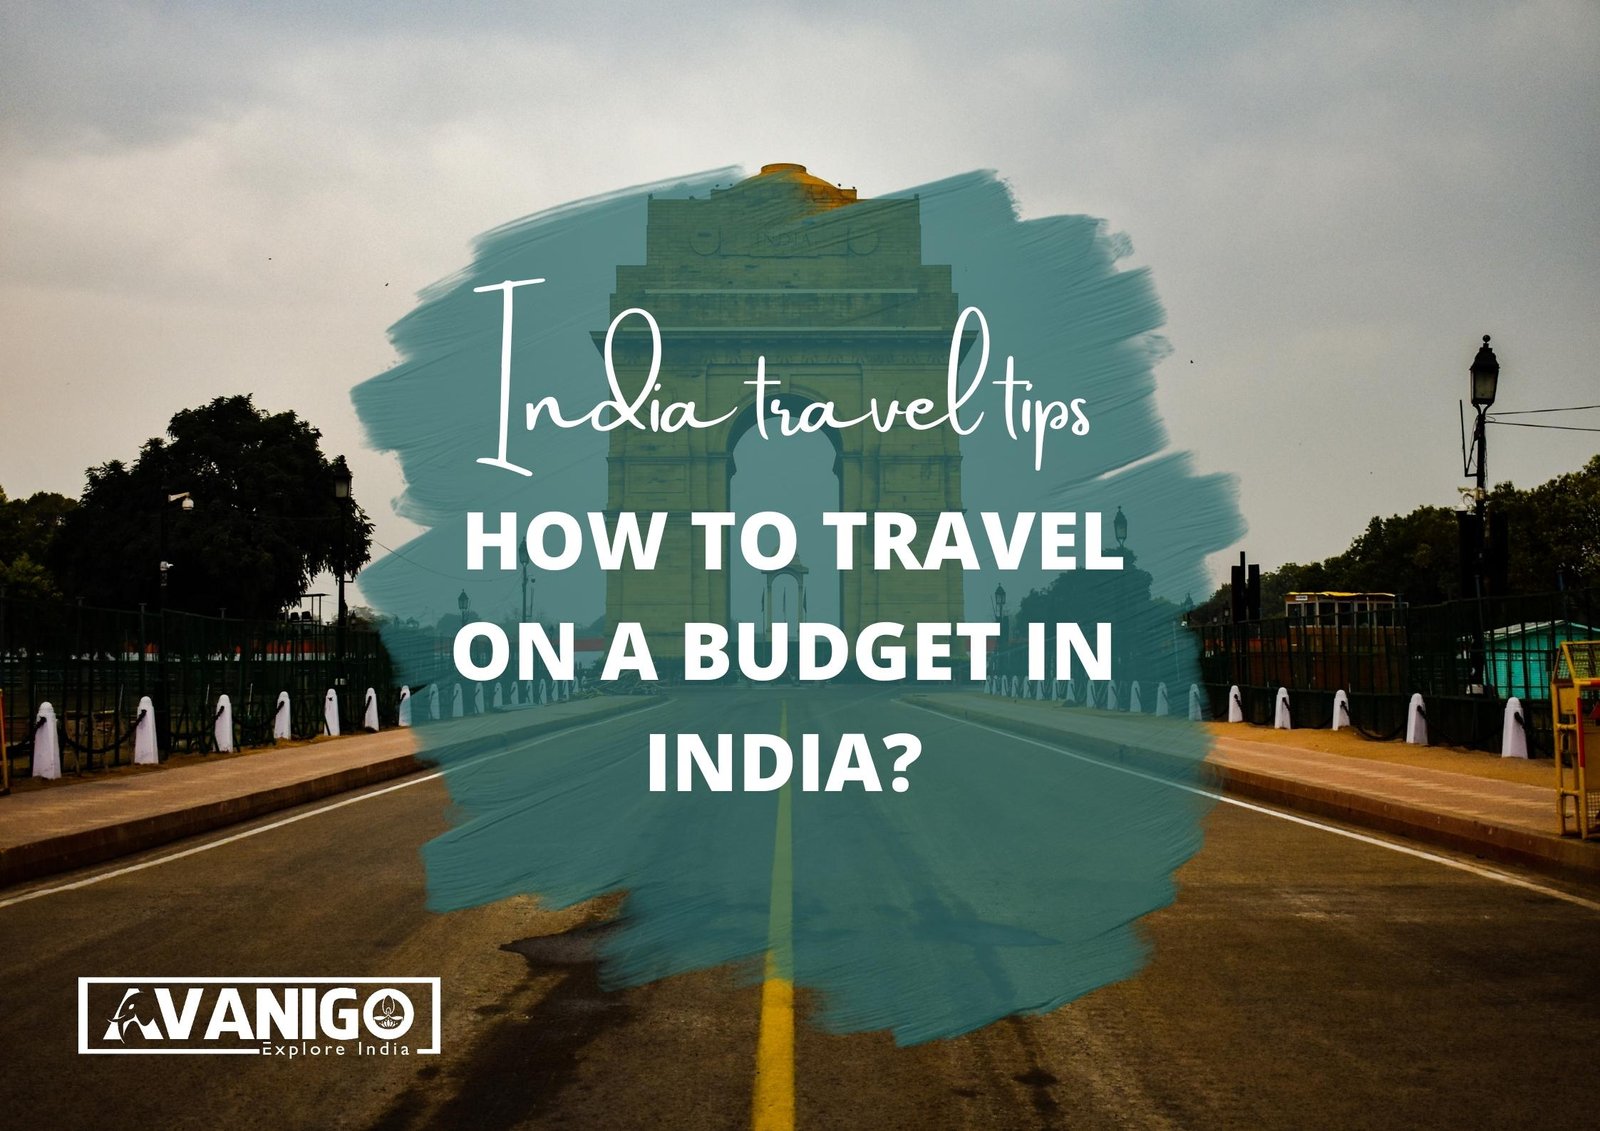 Travel to india on budget